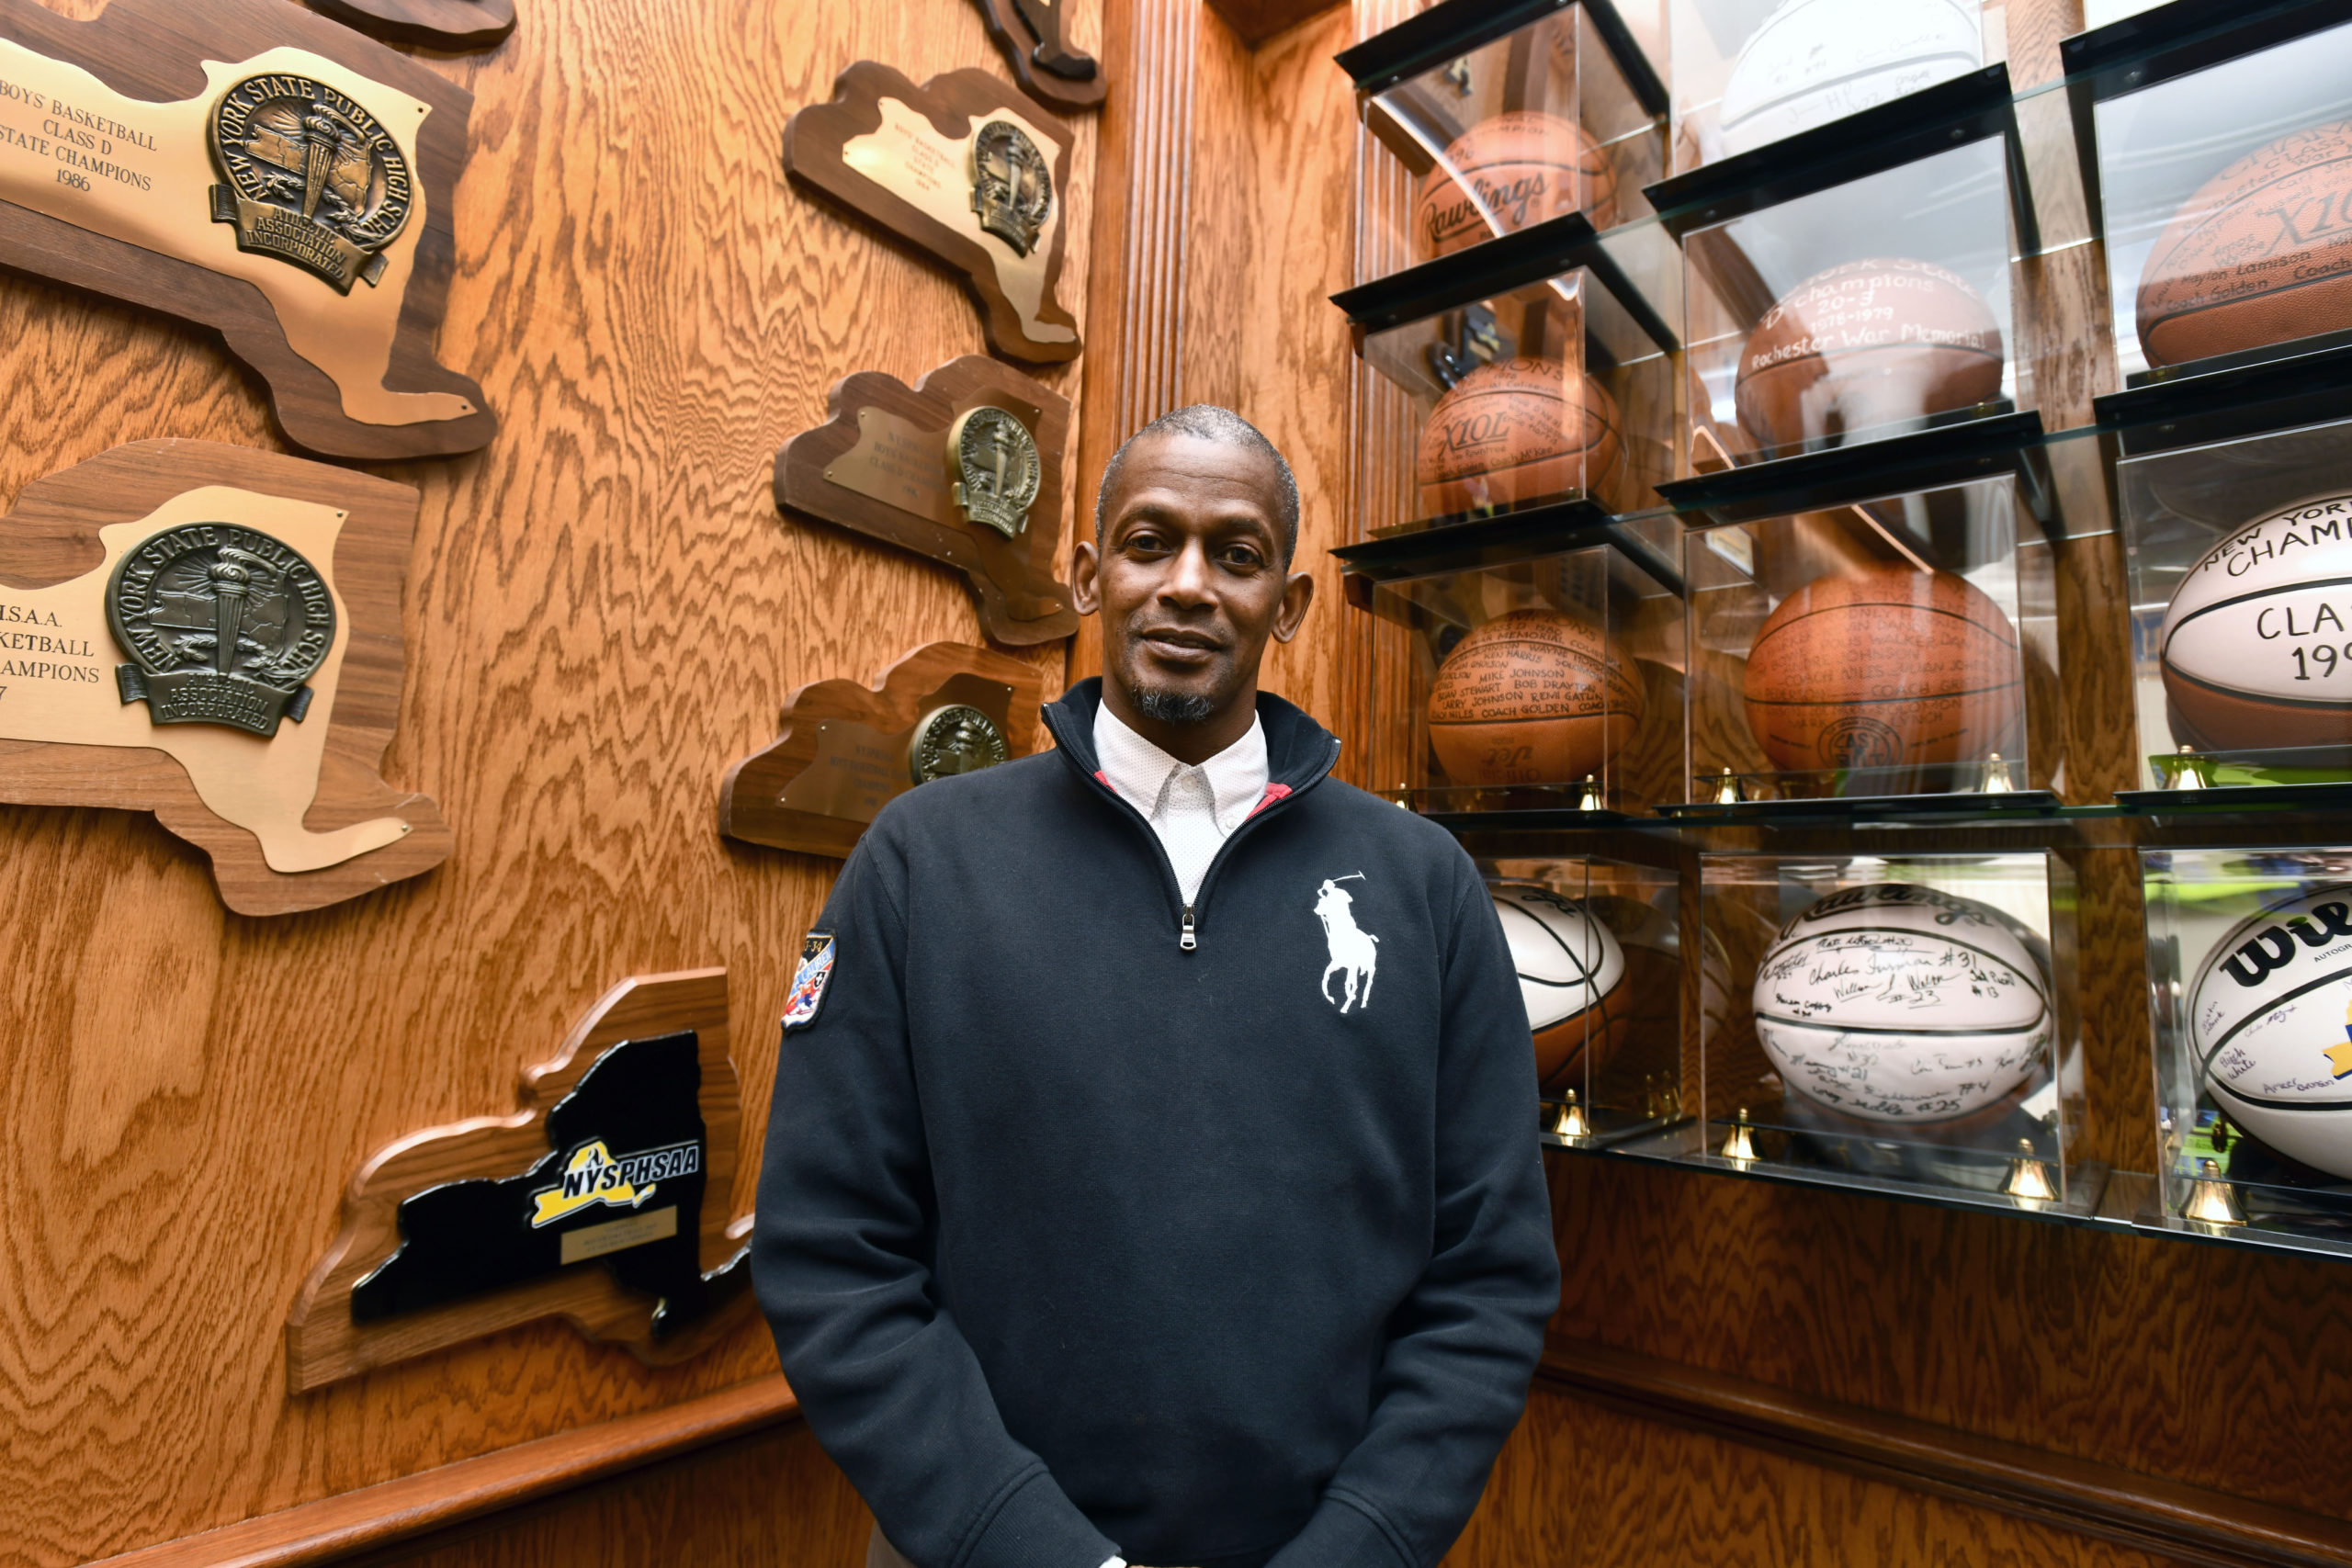 Headed To The Hall 
November 14 -- Bridgehampton's Carl Johnson will be inducted into New York State Basketball Hall of Fame in March 2020. “I was speechless. I had to look at the text again,” Johnson said. “I was like, this is crazy. It’s an unbelievable honor. I never thought it was going to happen. Most coaches go into coaching because you love the game, and we’re not thinking about anything but trying to help kids out and win a championship and help the kids be the best they can be and reach their goals.”